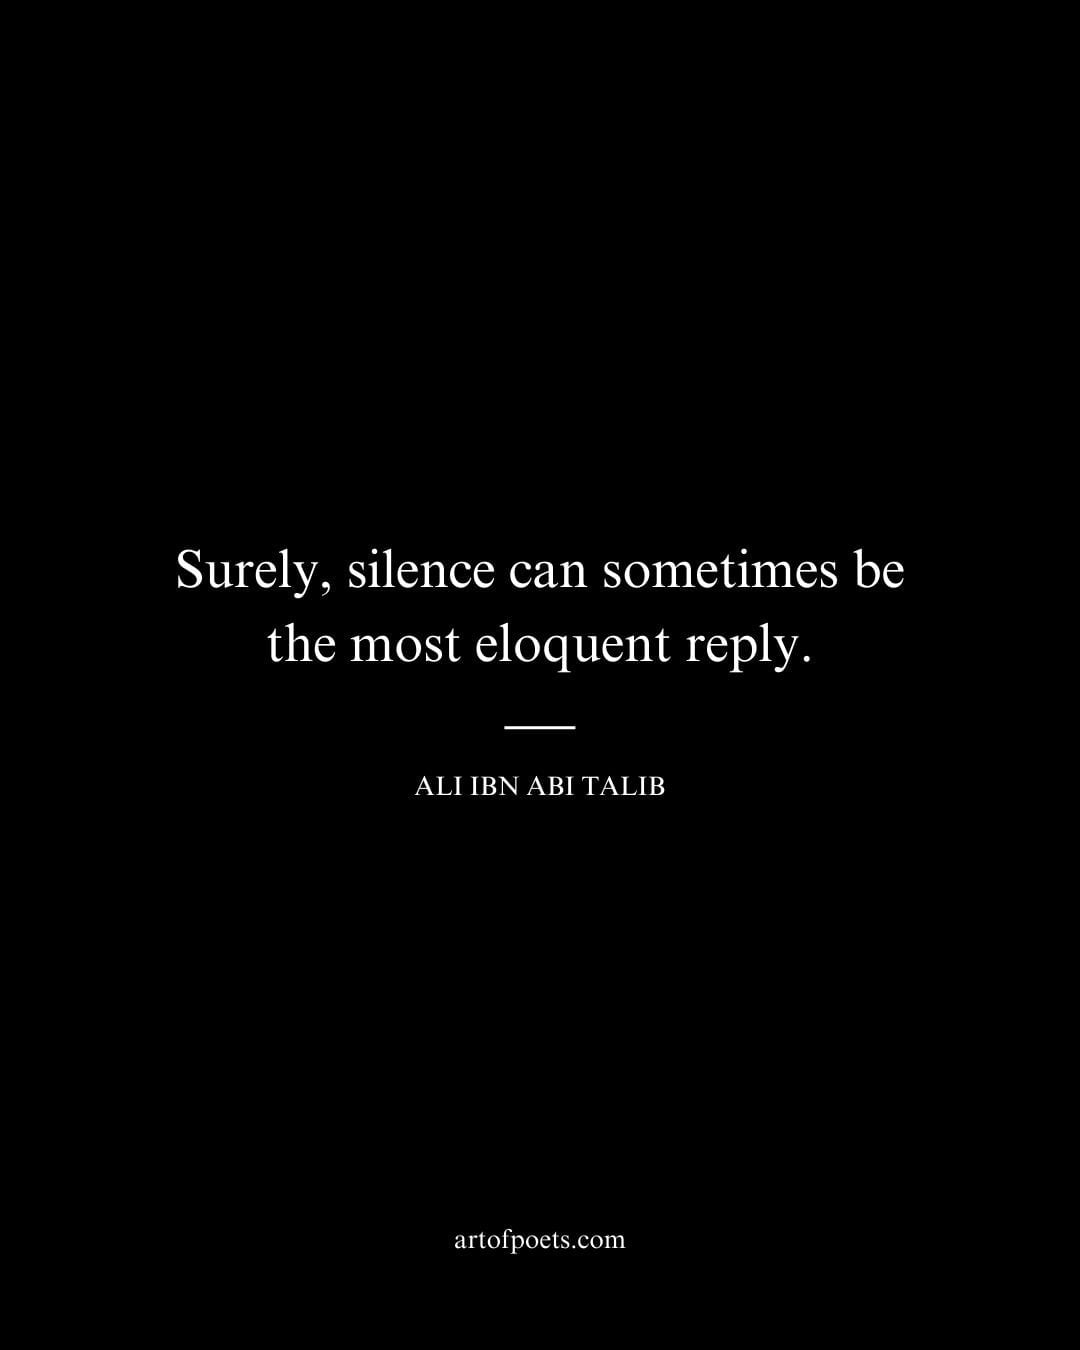 Surely silence can sometimes be the most eloquent reply